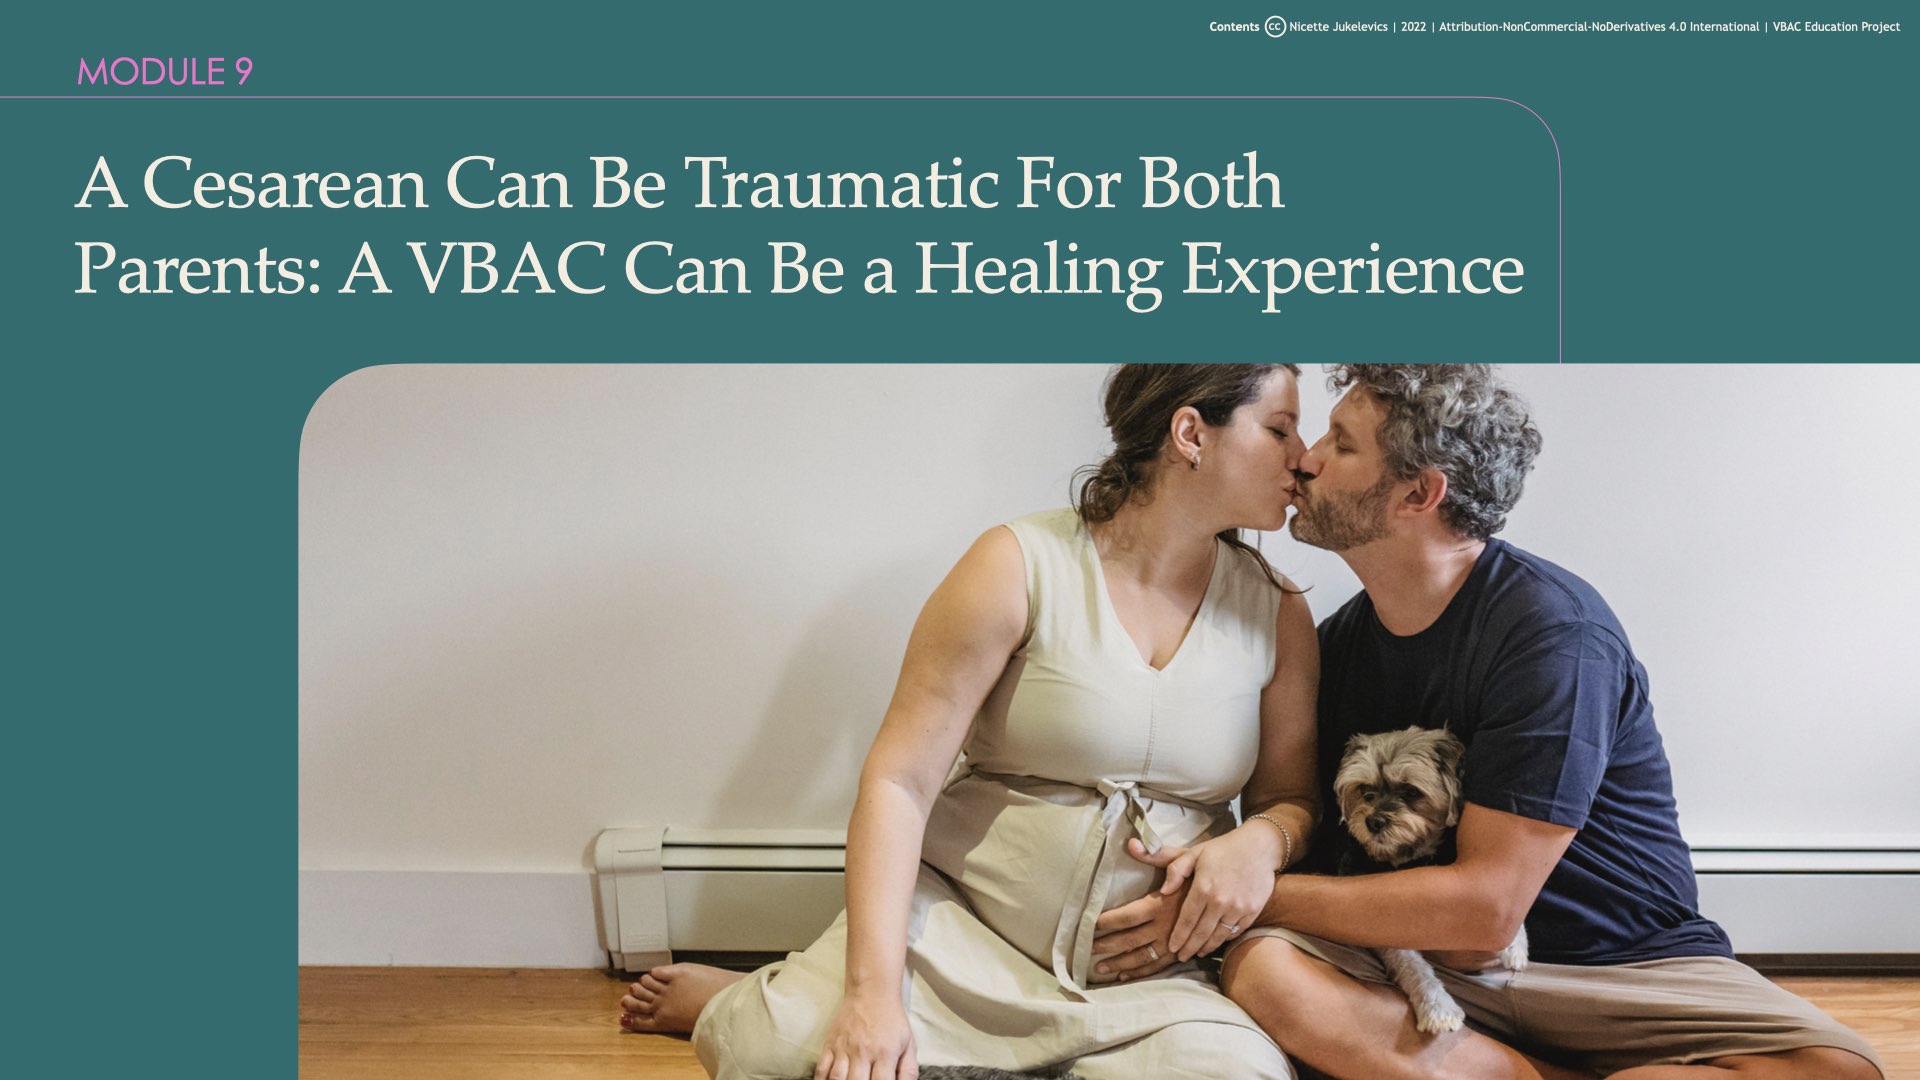 Module 9: A Cesarean Can Be Traumatic For Both Parents: A VBAC Can Be a Healing Experience